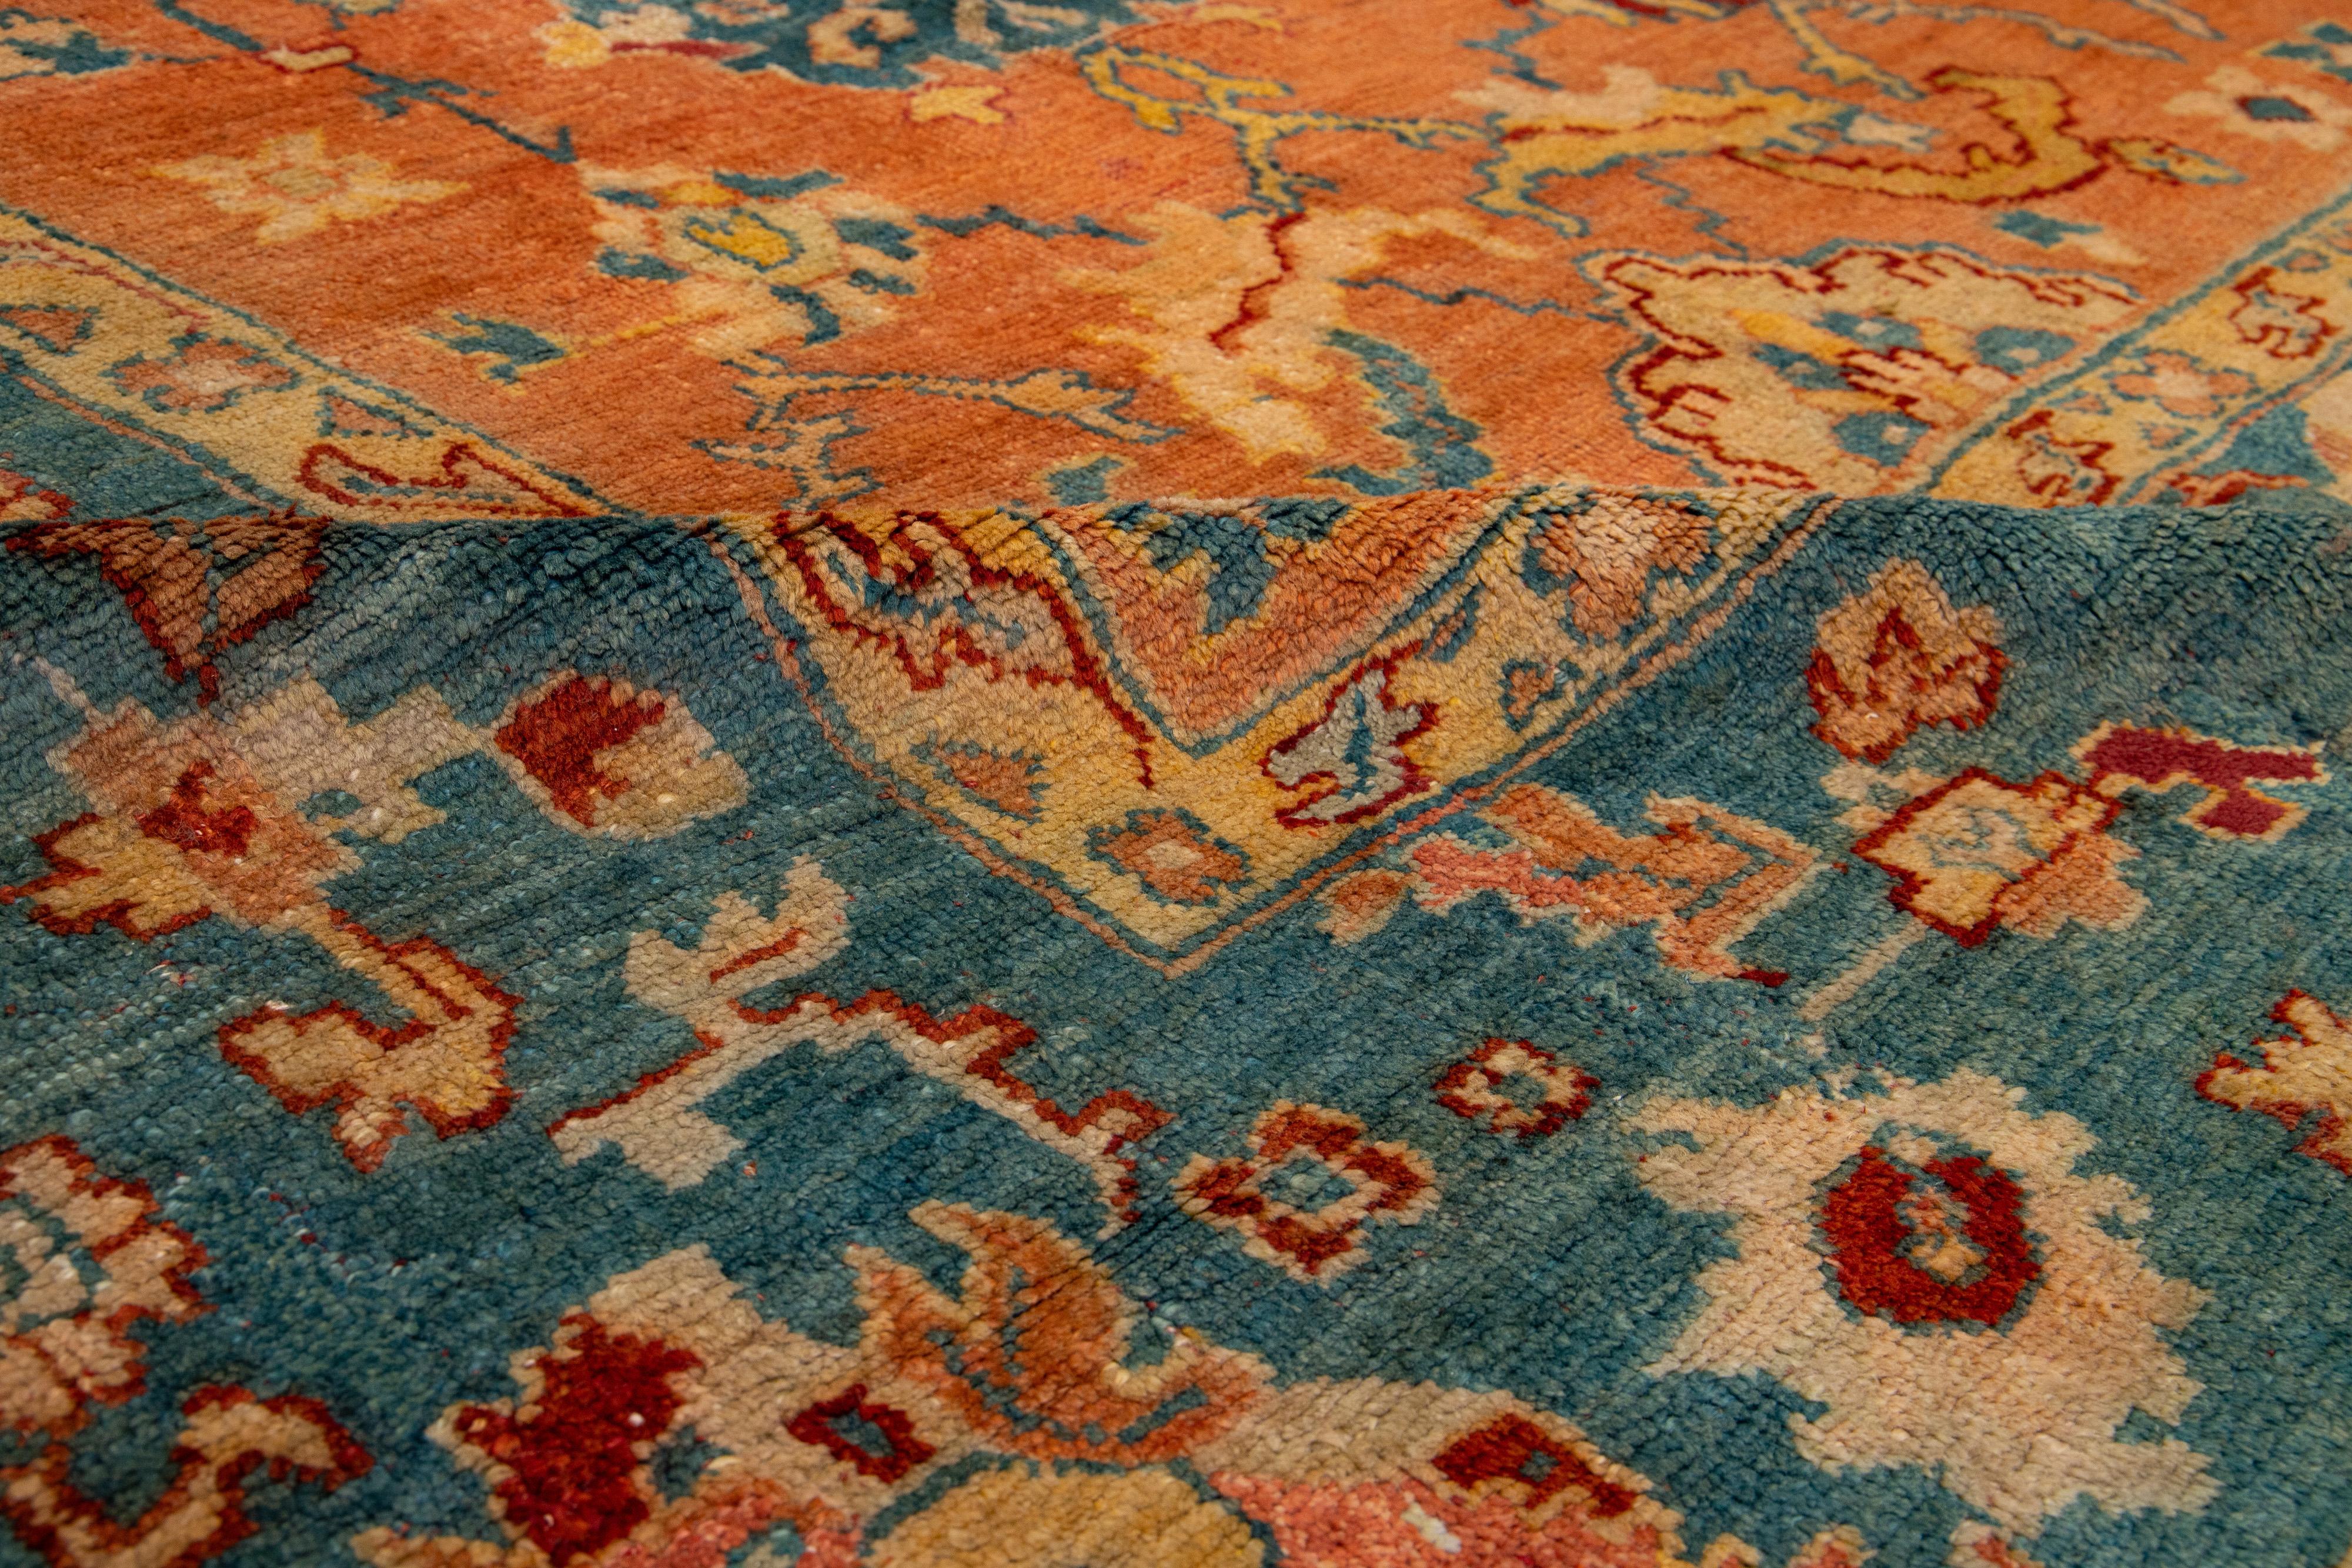 Orange and Blue Antique Turkish Oushak Wool Rug Handmade From the 1880s For Sale 3